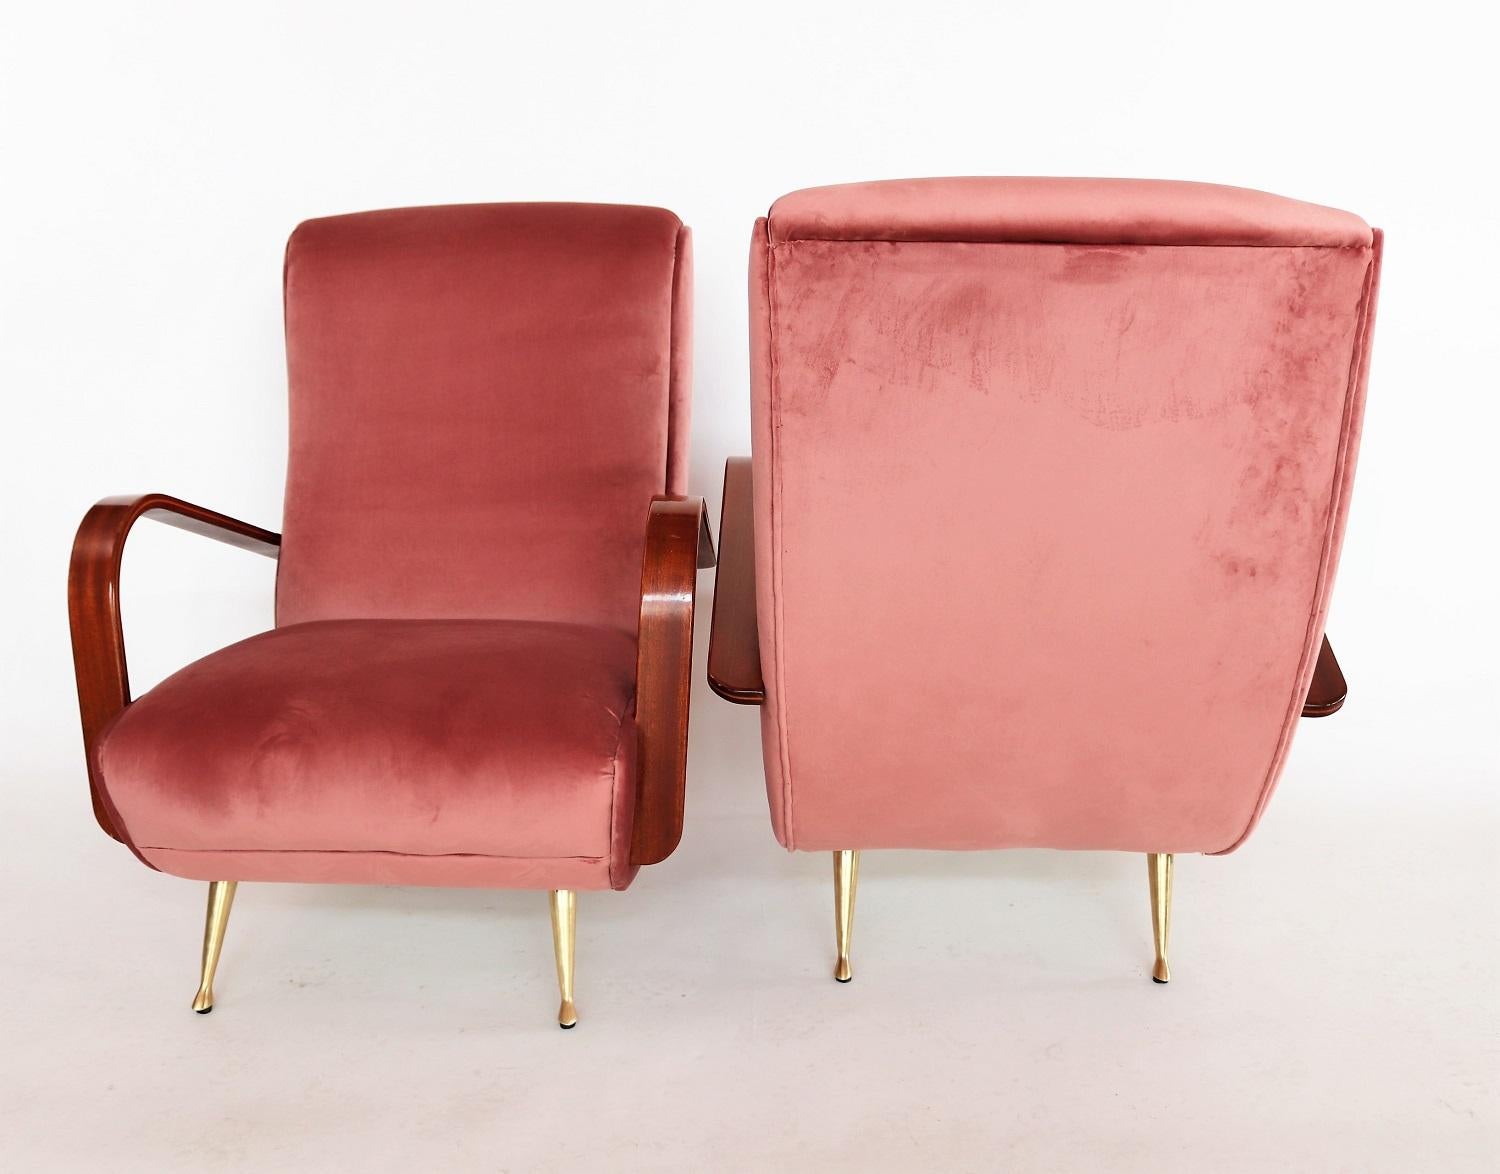 Italian Midcentury Armchairs in Mahogany, Brass and Coral Red Velvet, 1950s 15